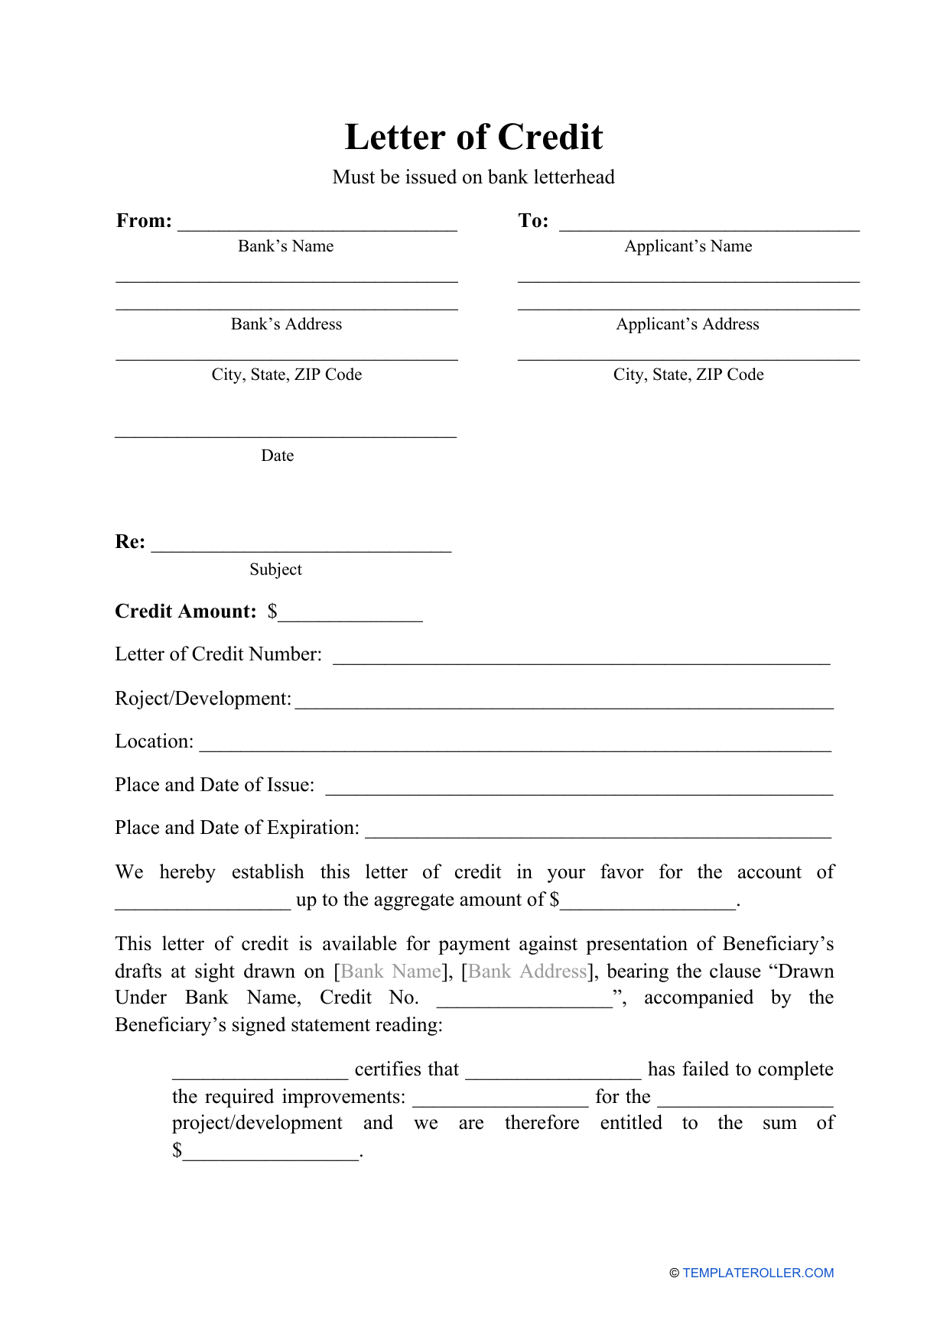 letter-of-credit-template-word-pdf-template-bank2home